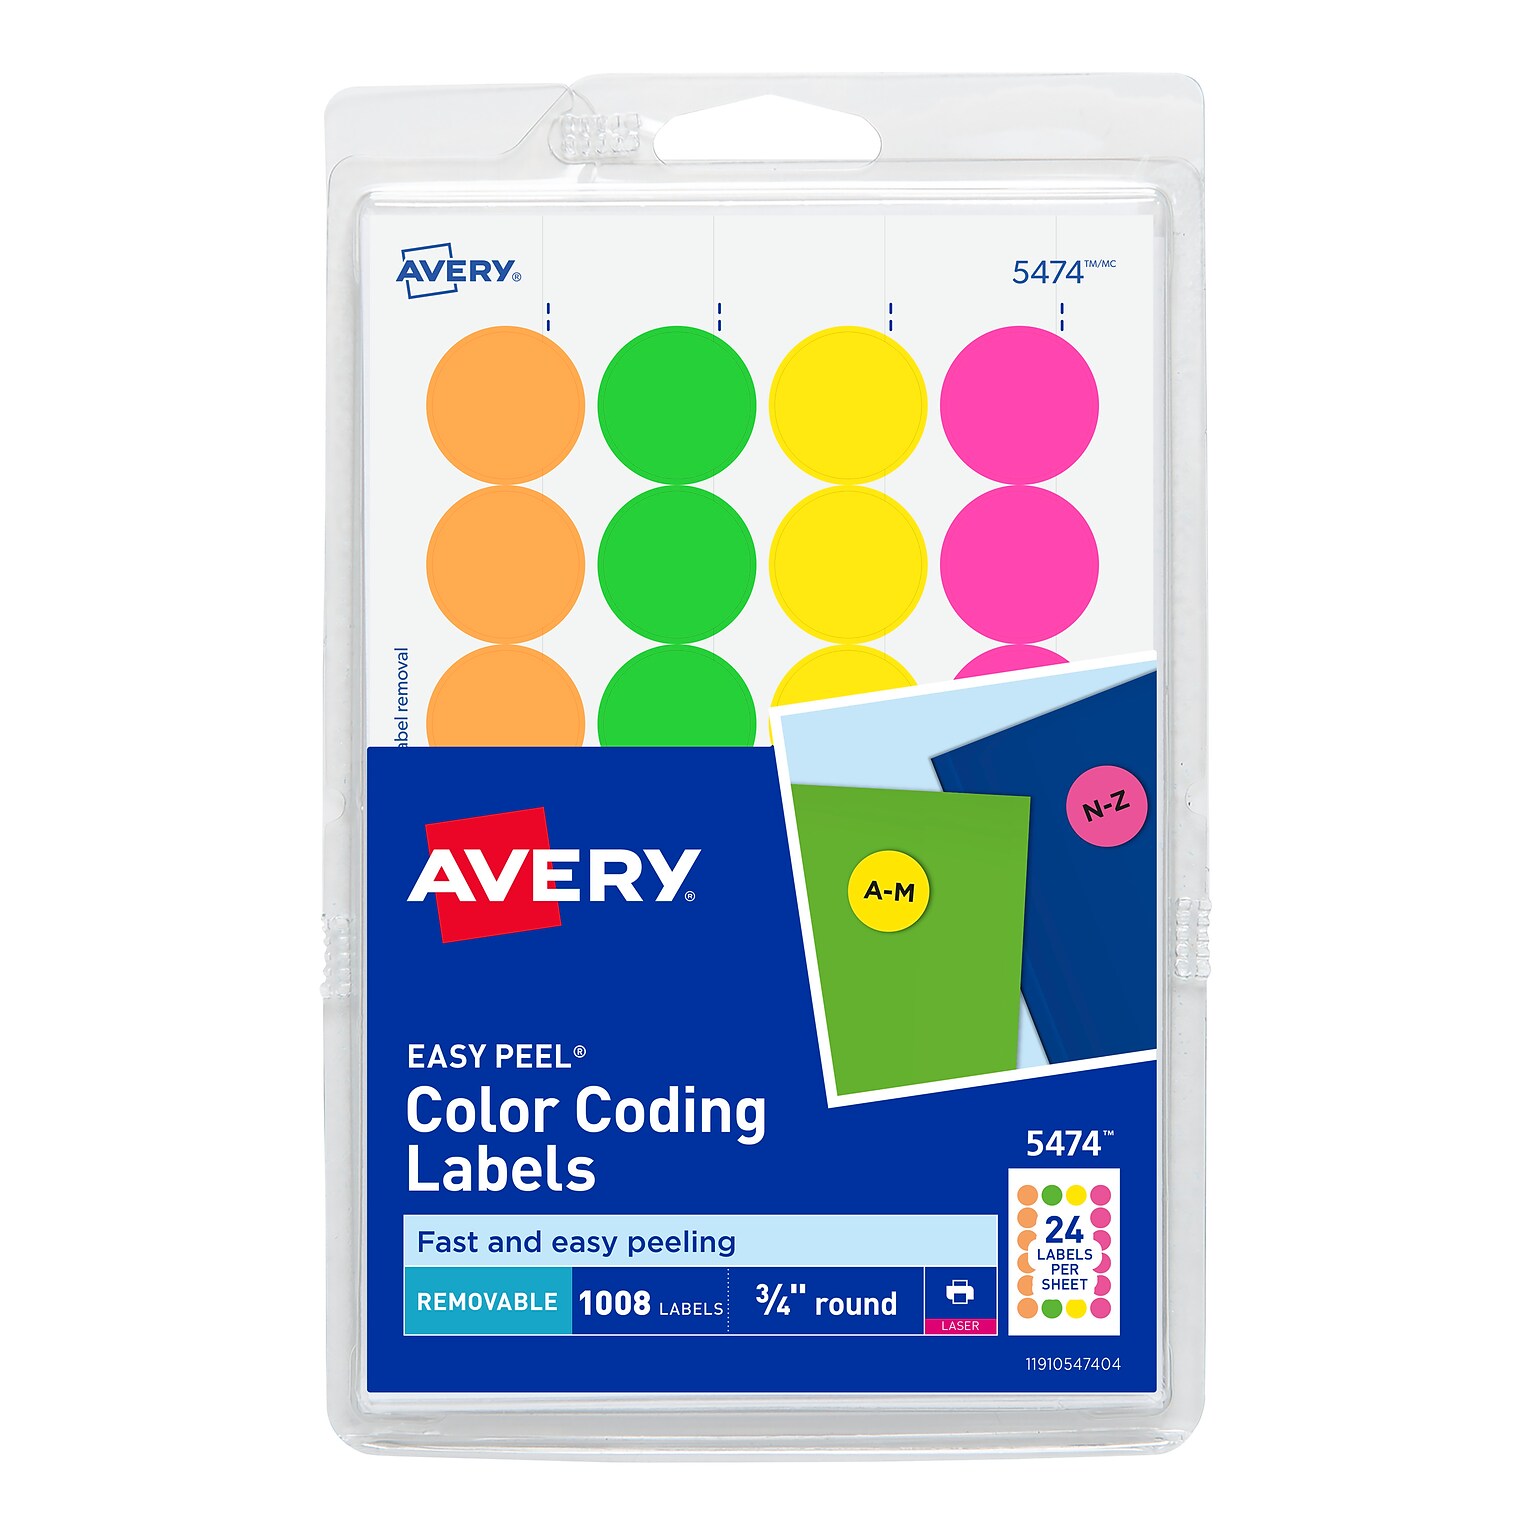 Avery Easy Peel Laser Color Coding Labels, 3/4 Dia., Assorted Colors, 1008 Labels Per Pack (5474)